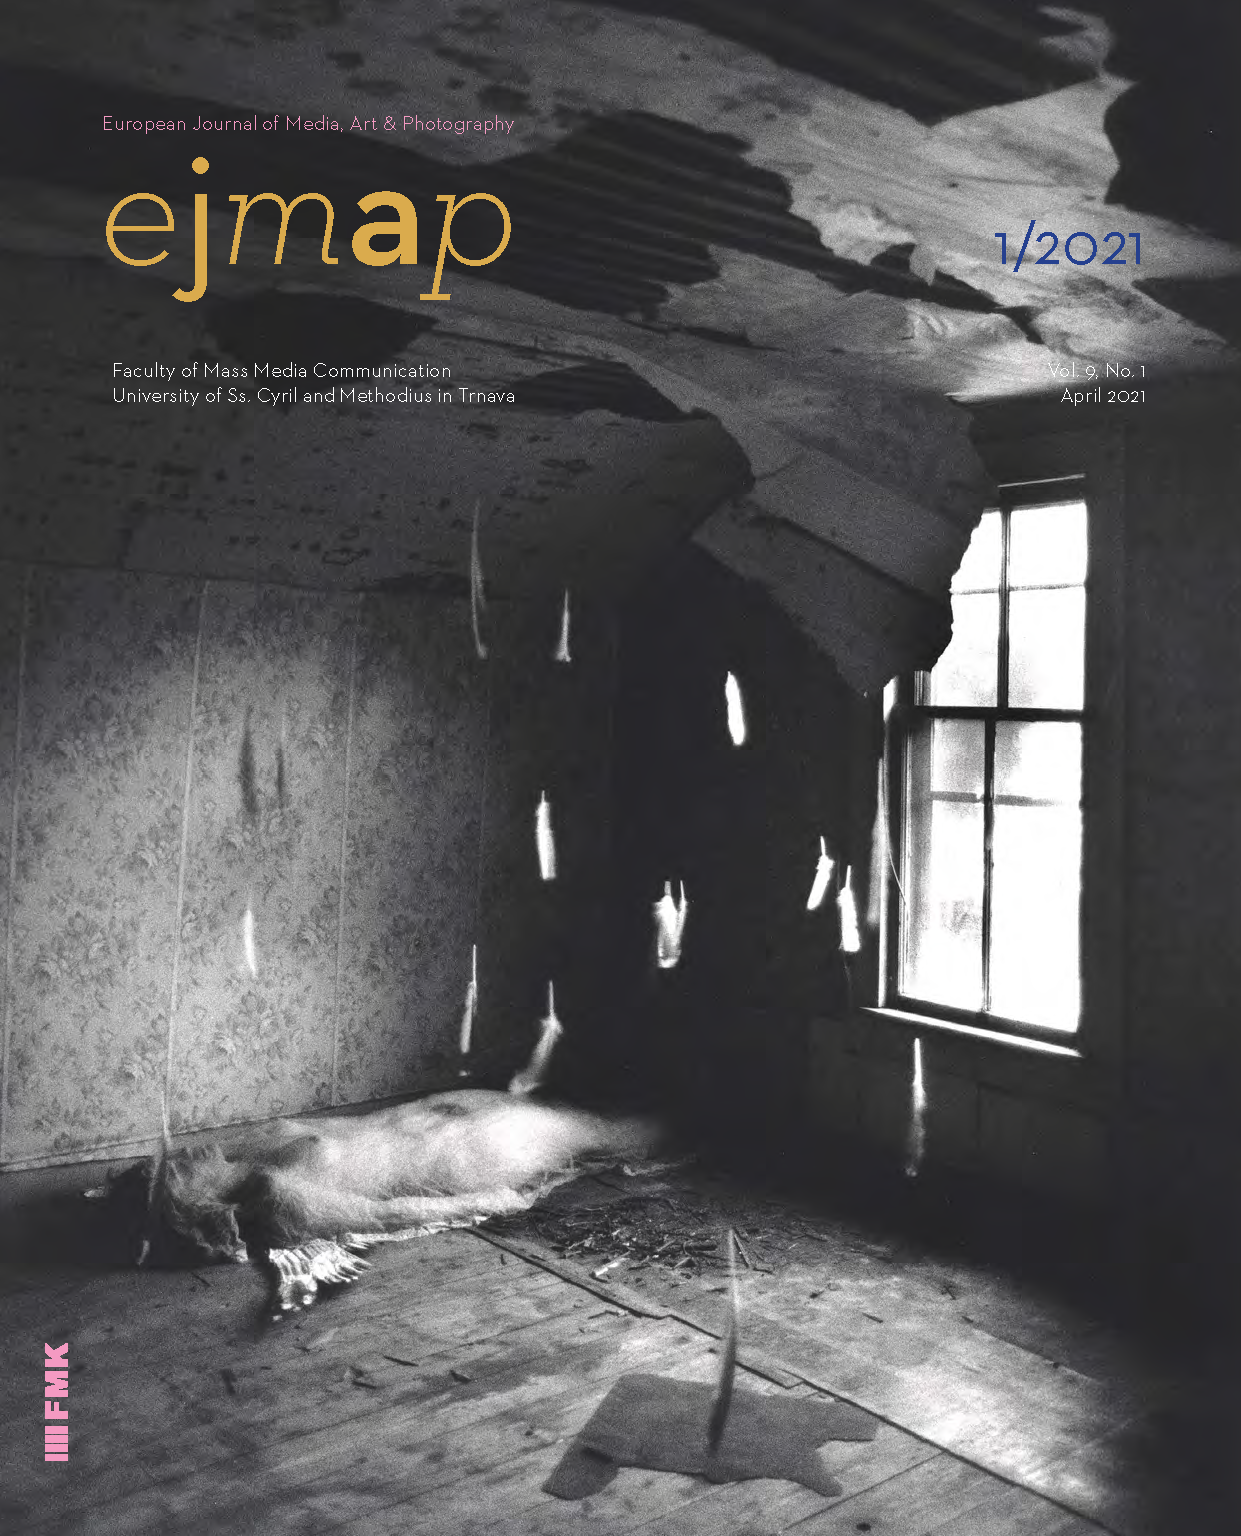 Editorial of European Journal of media, art and photography, Vol. 9, No, 1, 2021